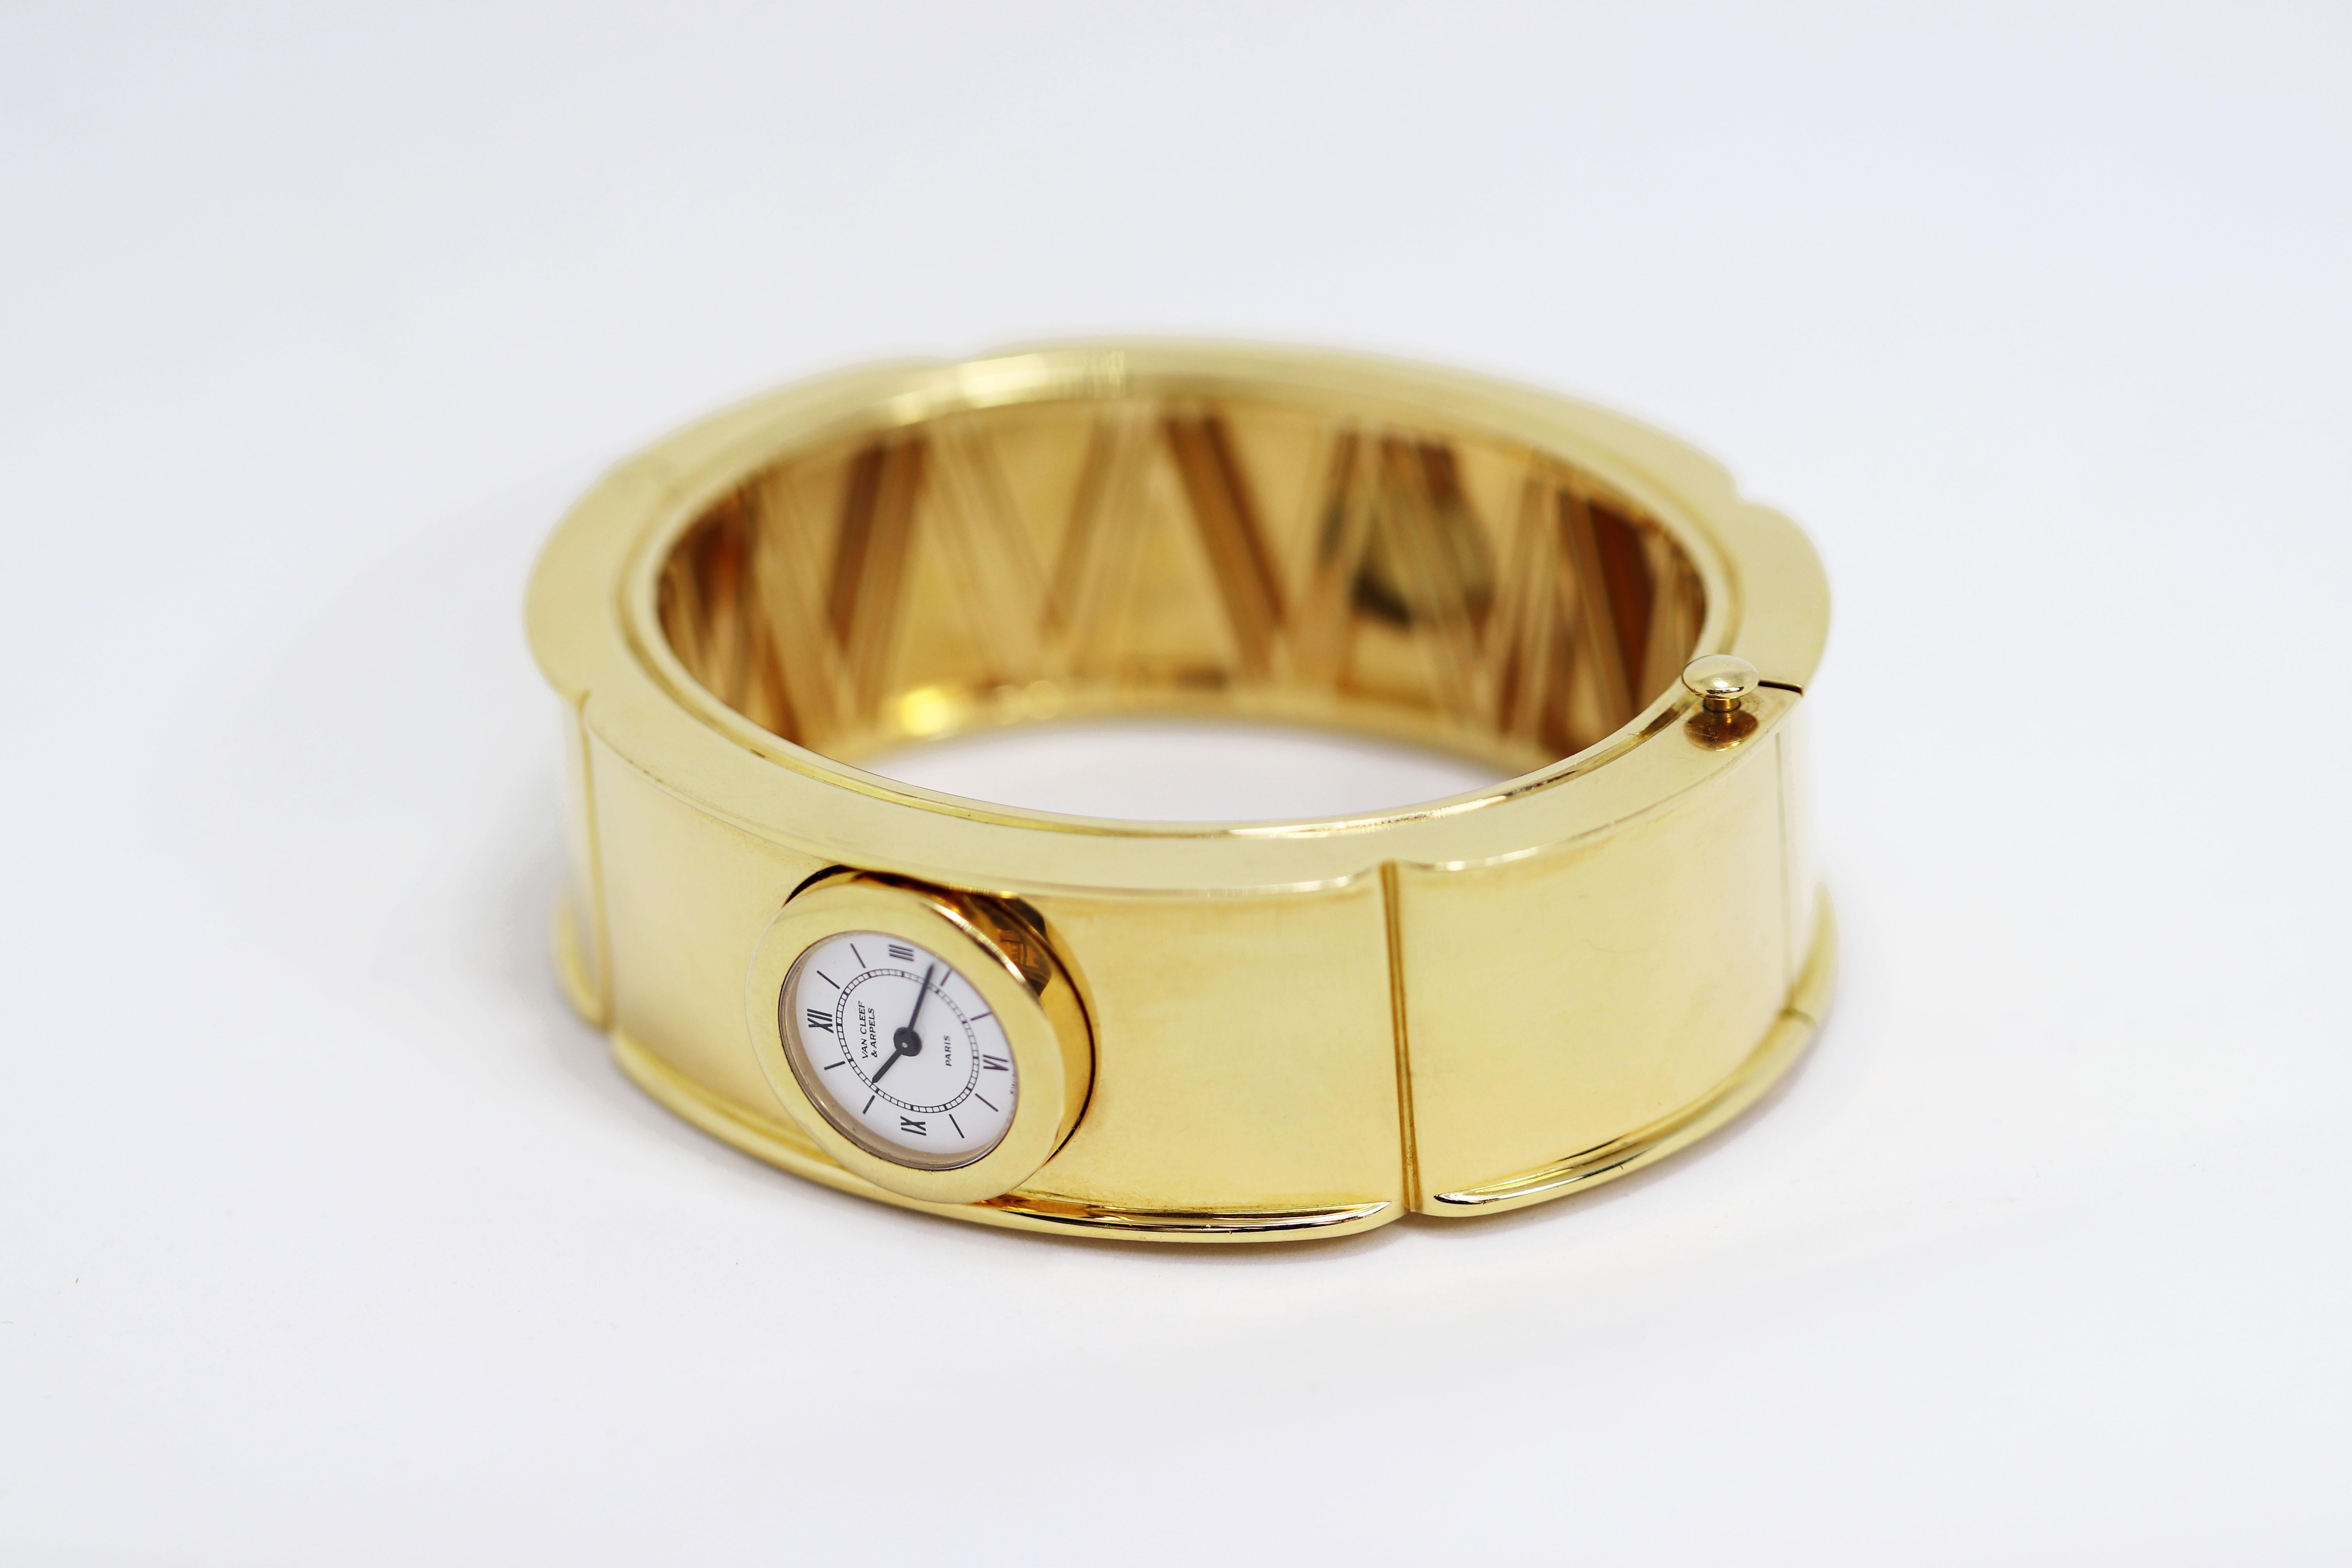 Beautiful solid gold Van Cleef & Arpels vintage bangle watch. This piece weighs an impressive 176.4 grams, measures 6.5